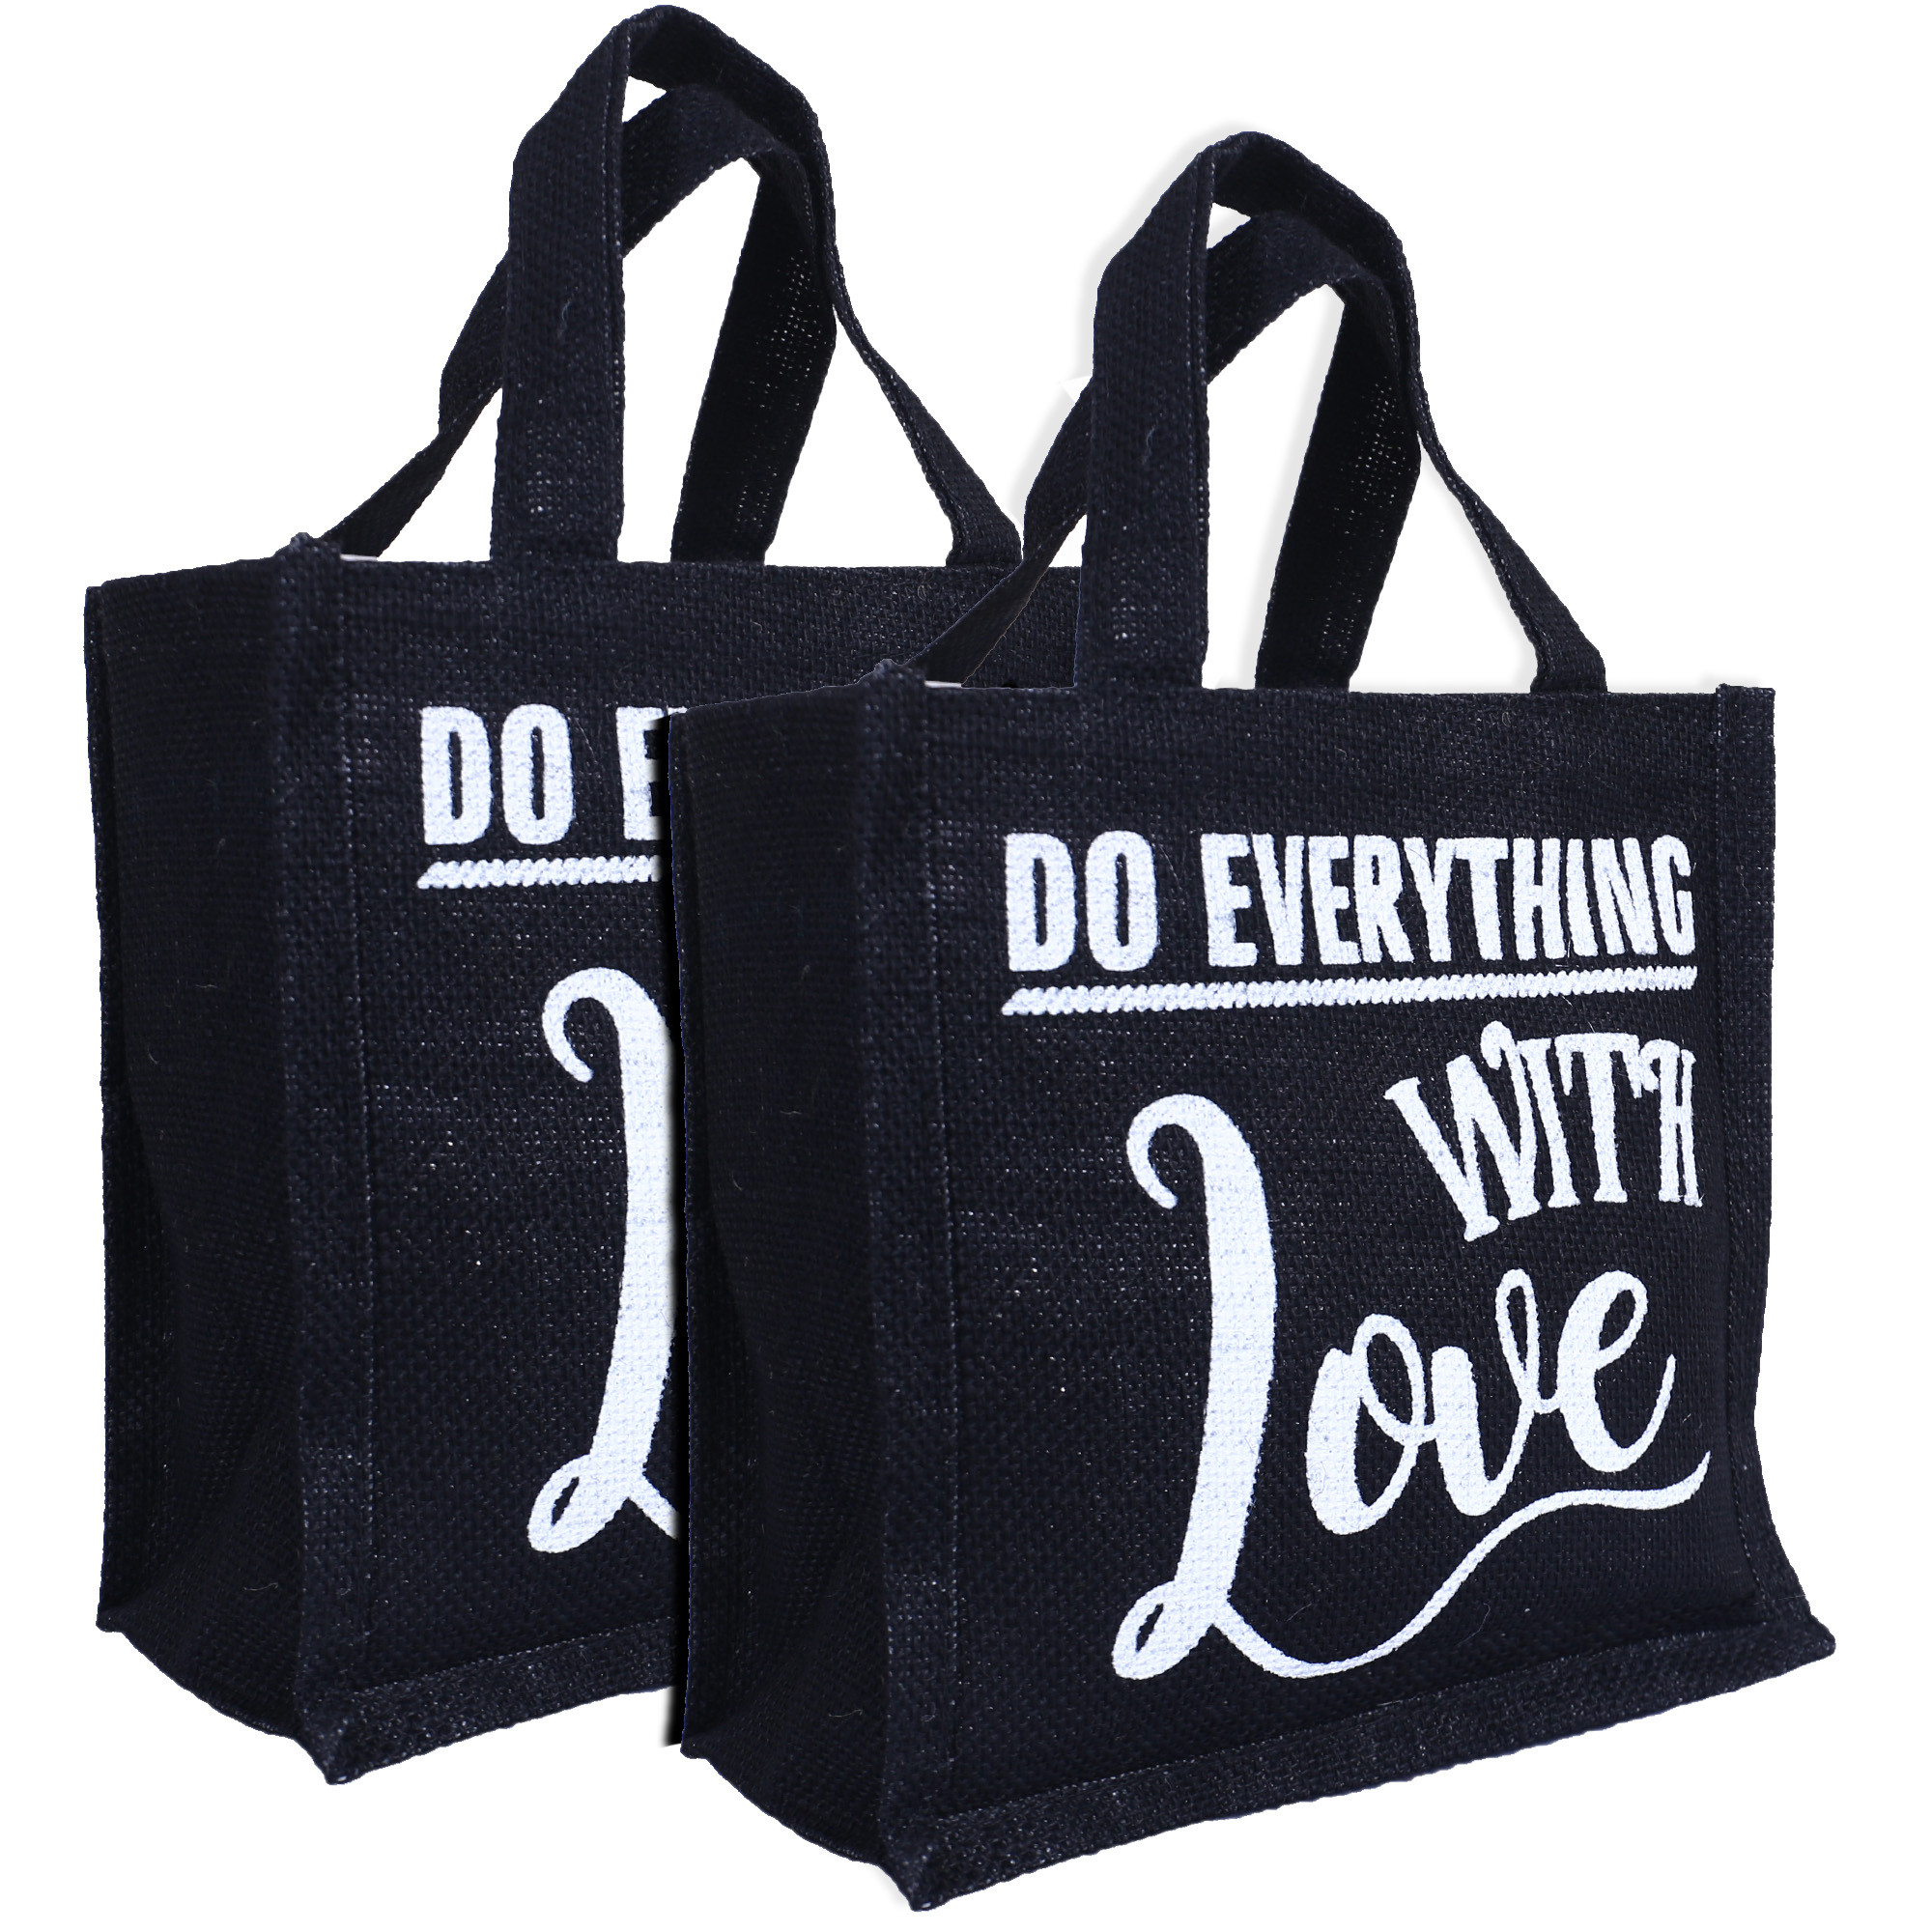 Kuber Industries Lunch Bag|Reusable Jute Fabric Tote Bag|Do Everything With Love Print Tiffin Carry Hand bag with Handle For office,School,Gift (Black)